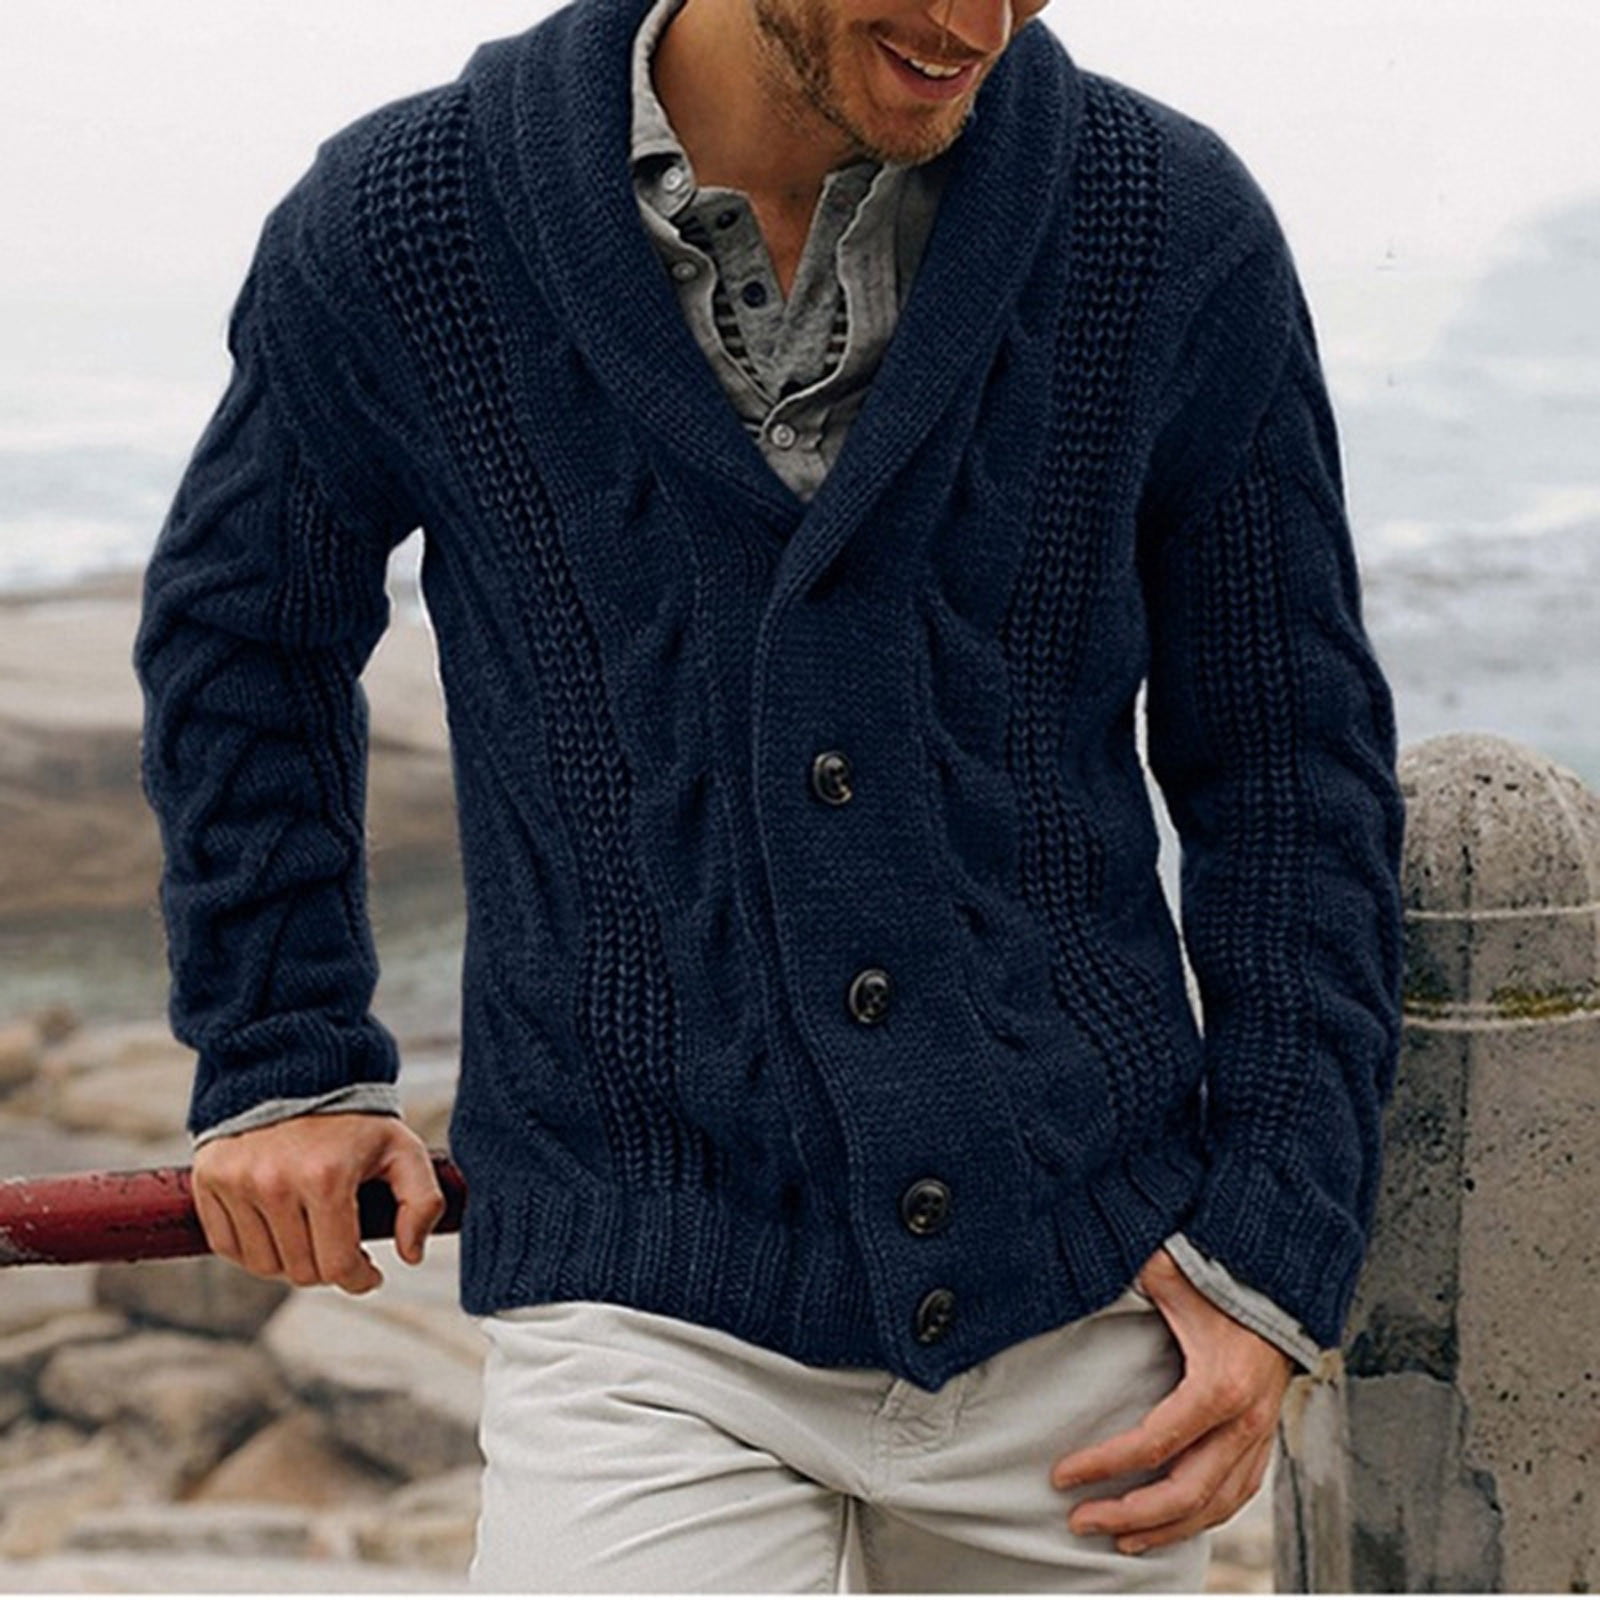 Egnmcr Mens Cable Knit Cardigan Sweater Shawl Collar Loose Fit Long Sleeve Casual Cardigans, Men's, Size: Small, Blue